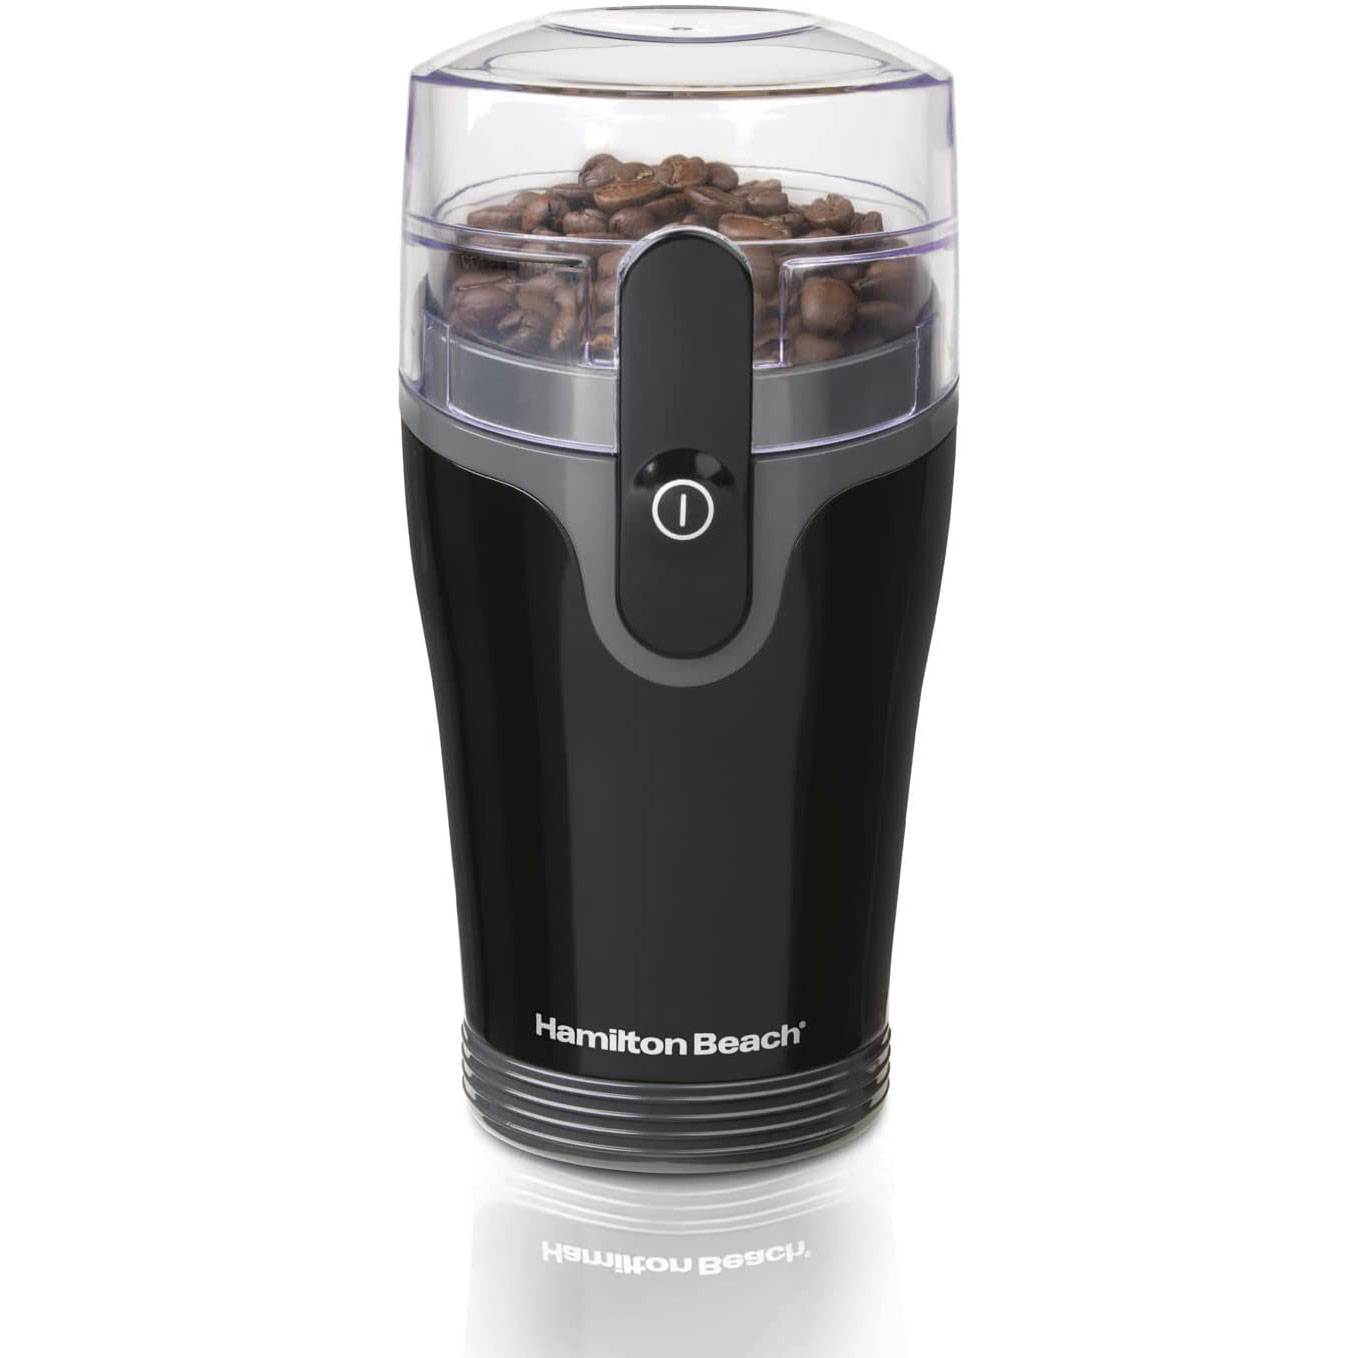 Up to 12 Electric Coffee Grinder Portable with Stainless Steel Blade Removable 